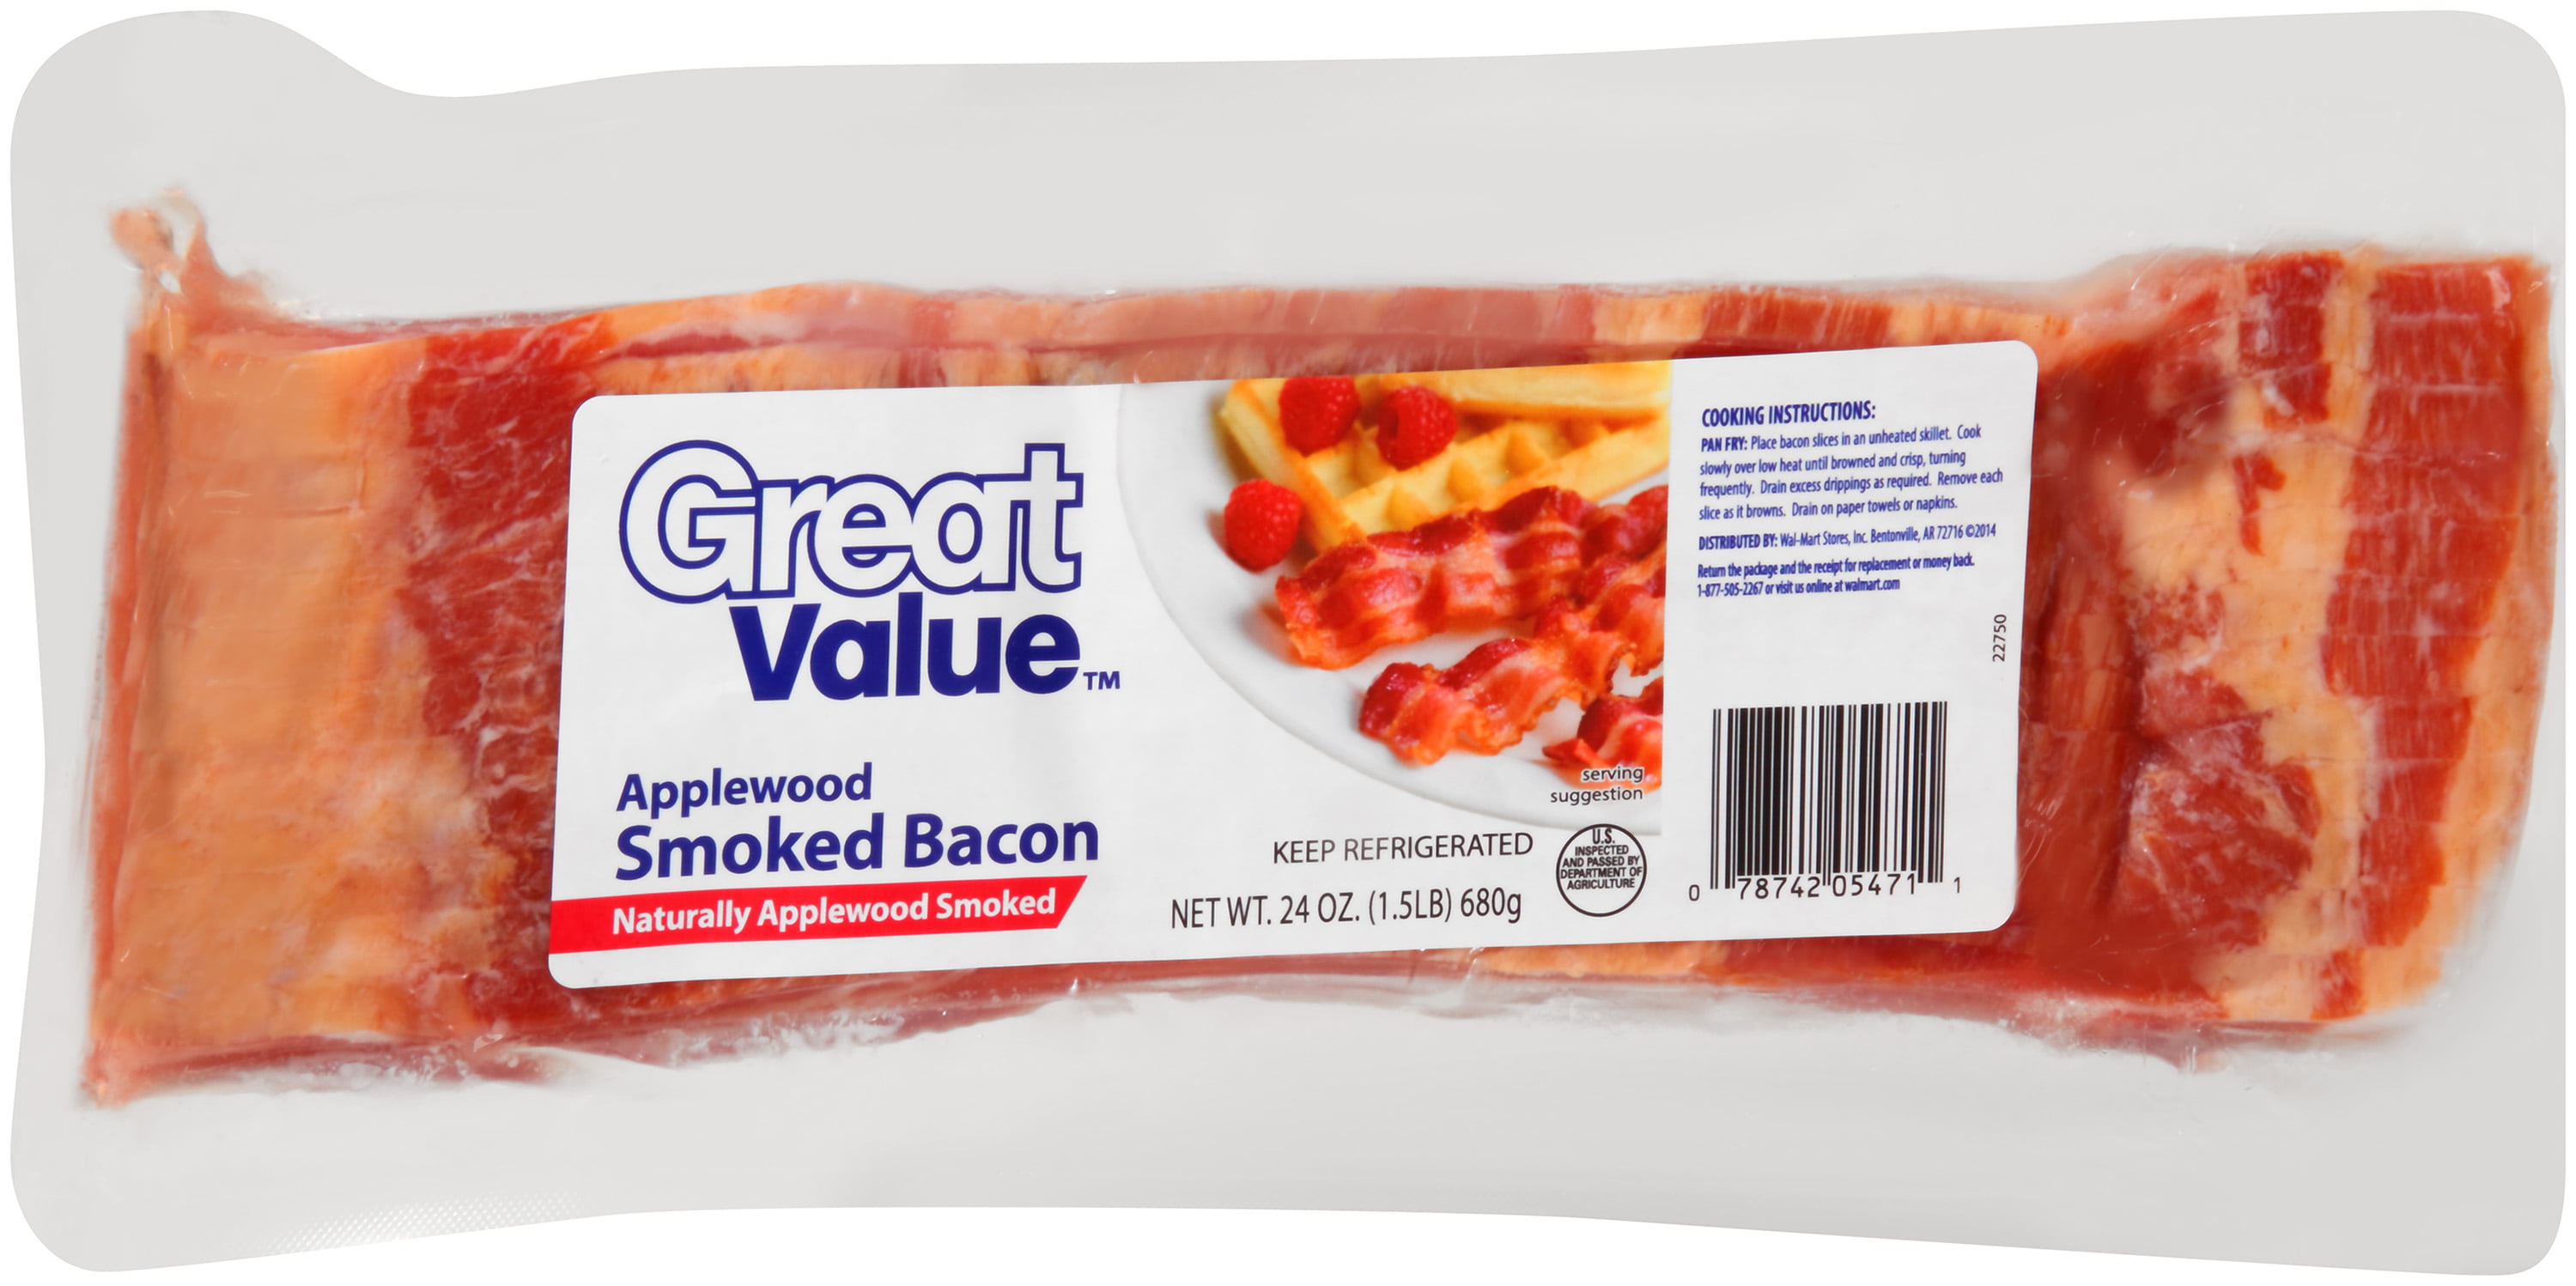 bacon bits great value